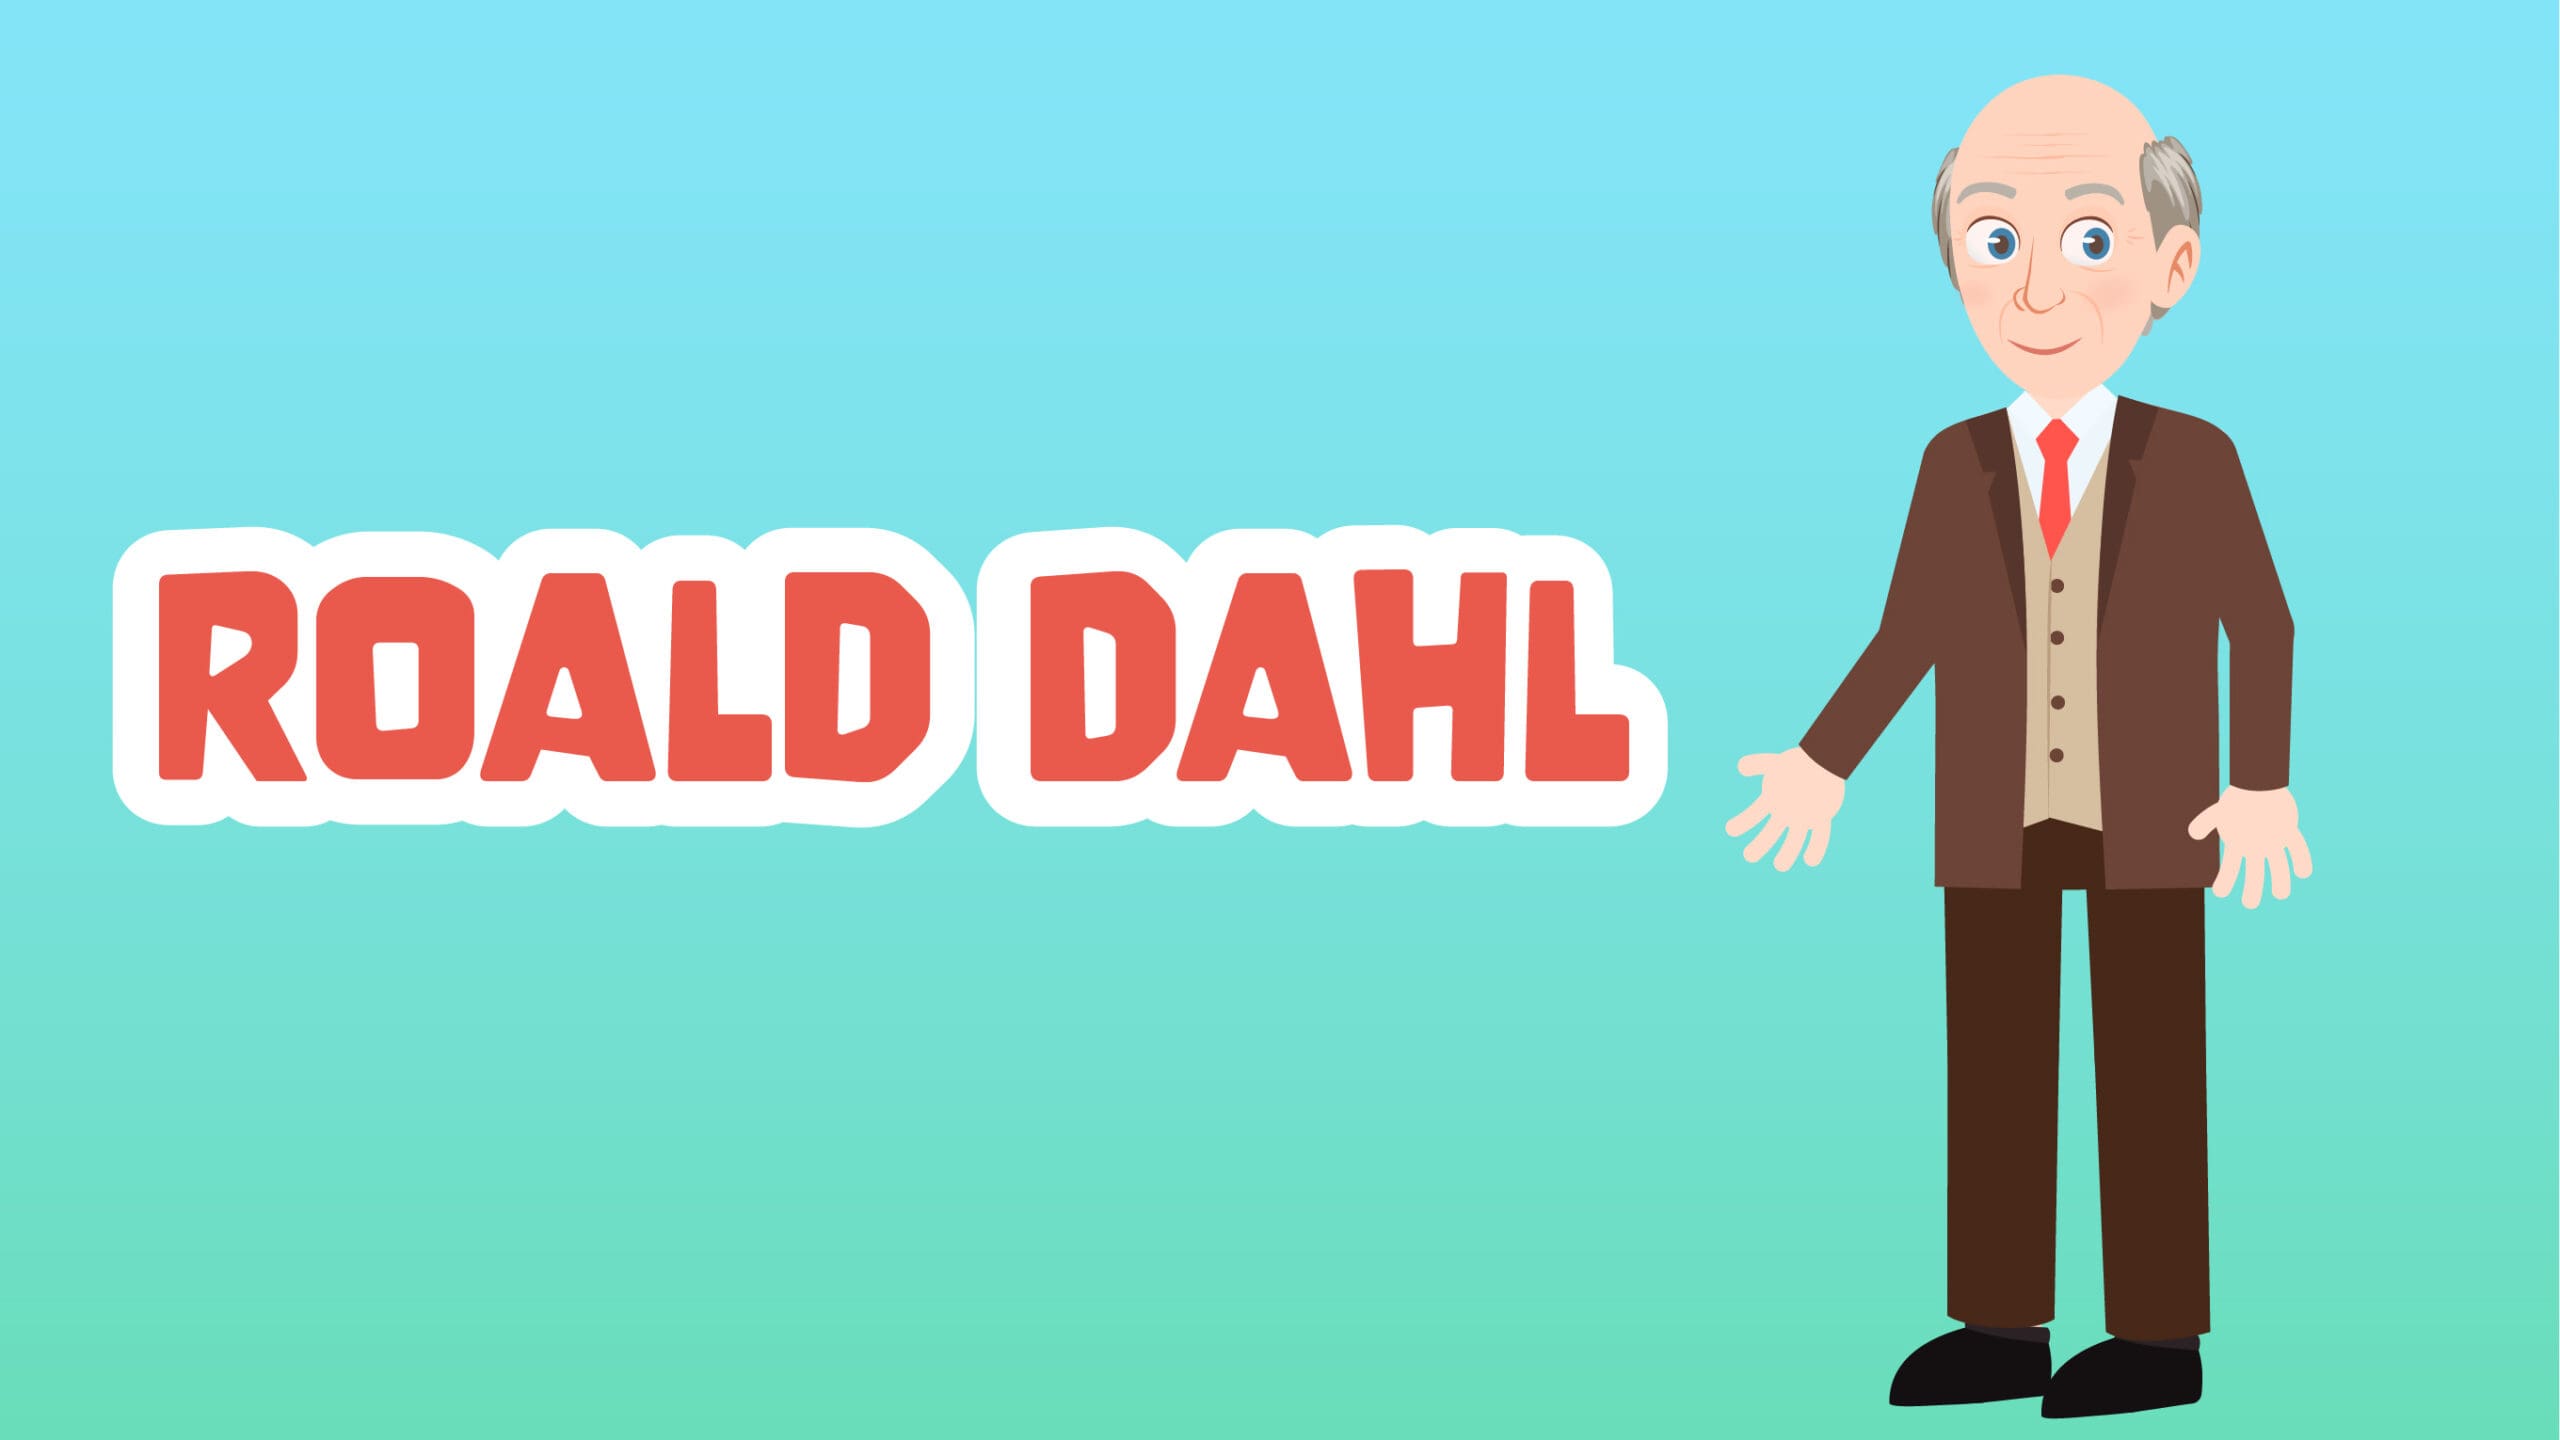 Roald Dahl Facts for Kids – 5 Fascinating Facts about Roald Dahl